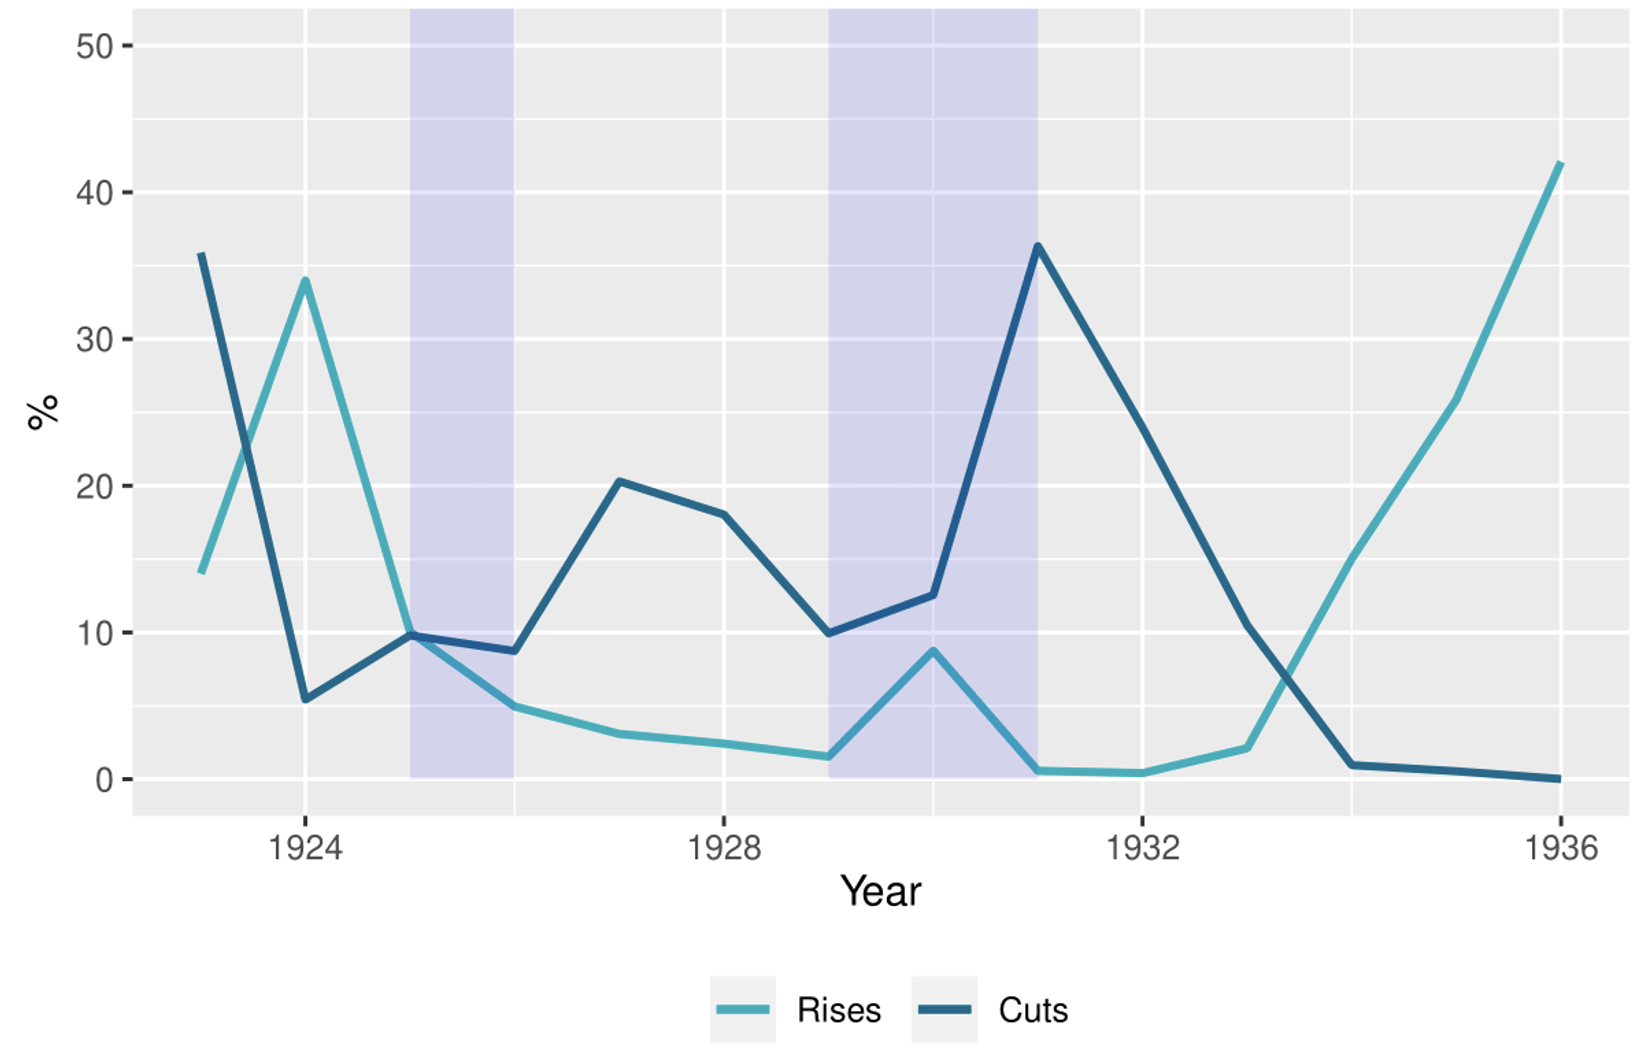 Figure 1 The share of employees receiving rises and cuts in nominal wages, 1923-36